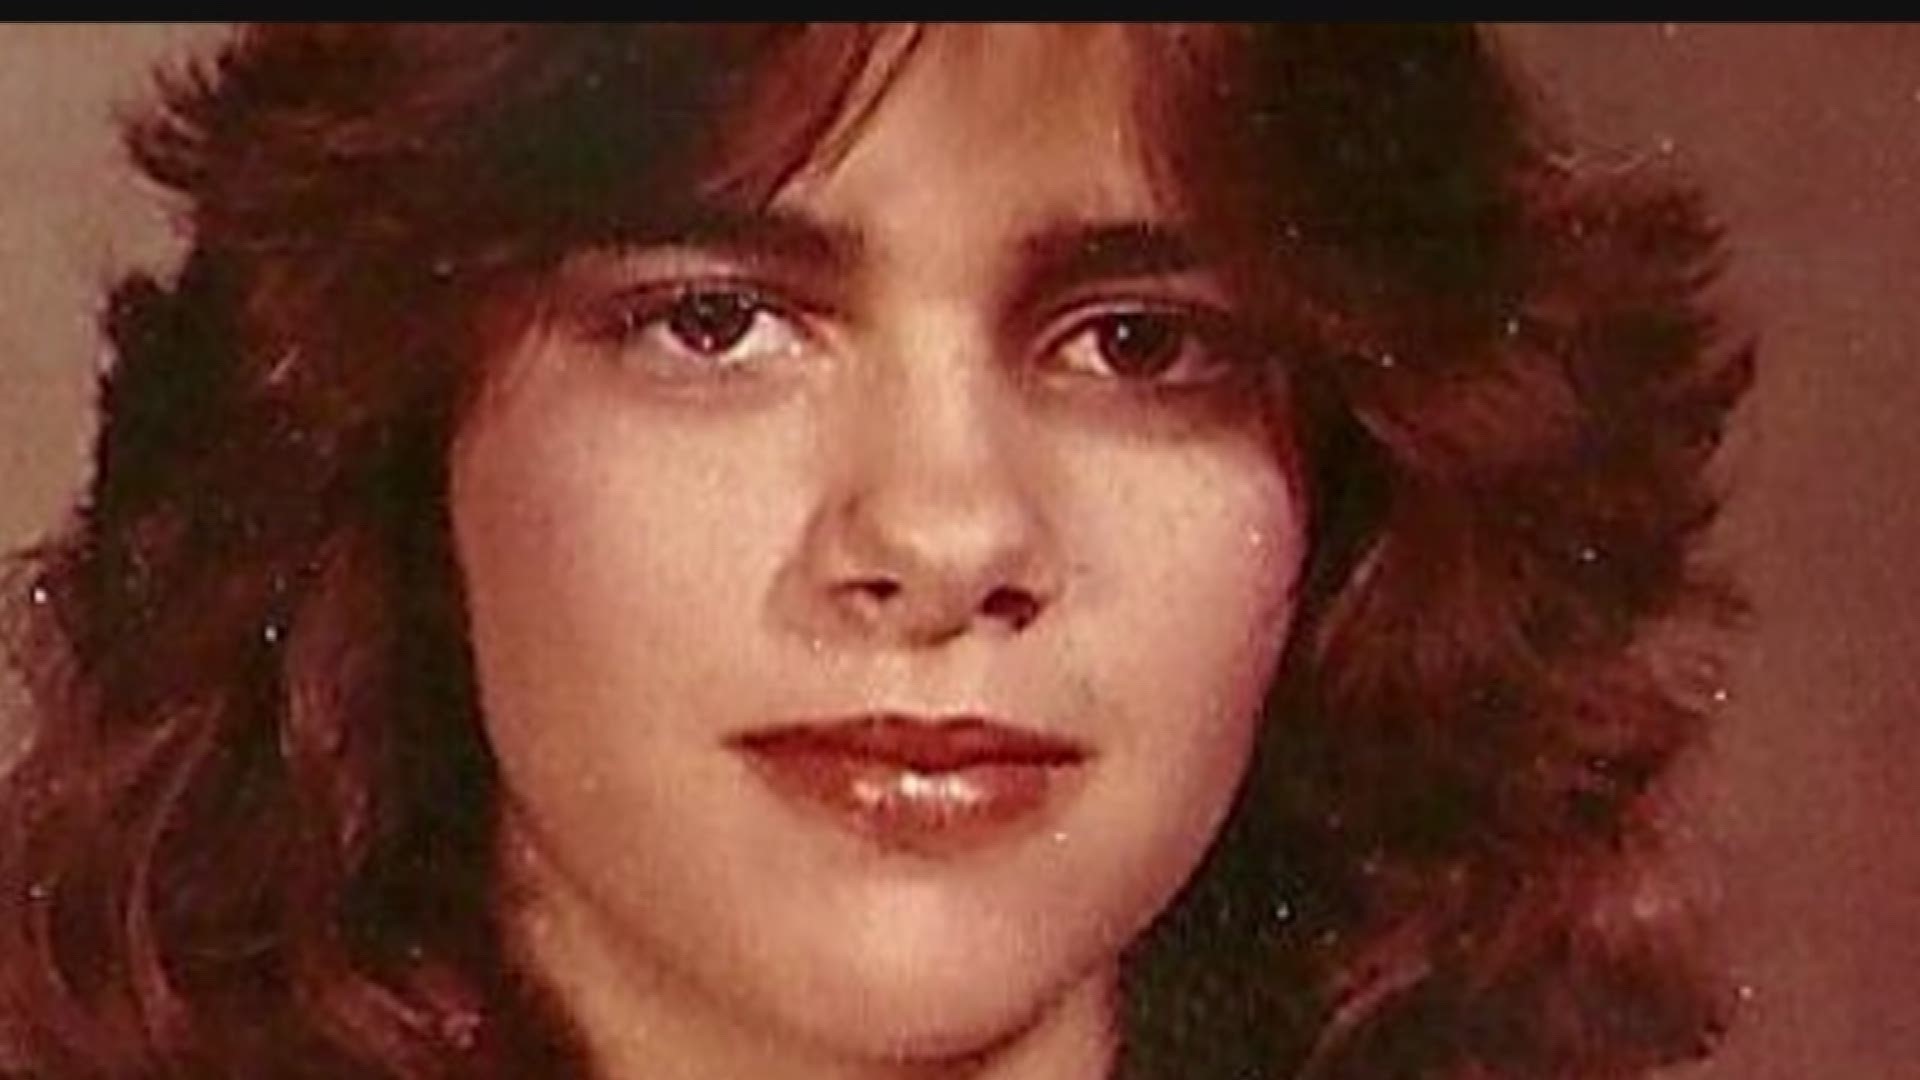 It was 1984 when a 13-year-old girl missing from Corpus Christi was found brutally murdered. Her name was Helen Kilgore, and to this day, no one has ever been convicted of the crime.